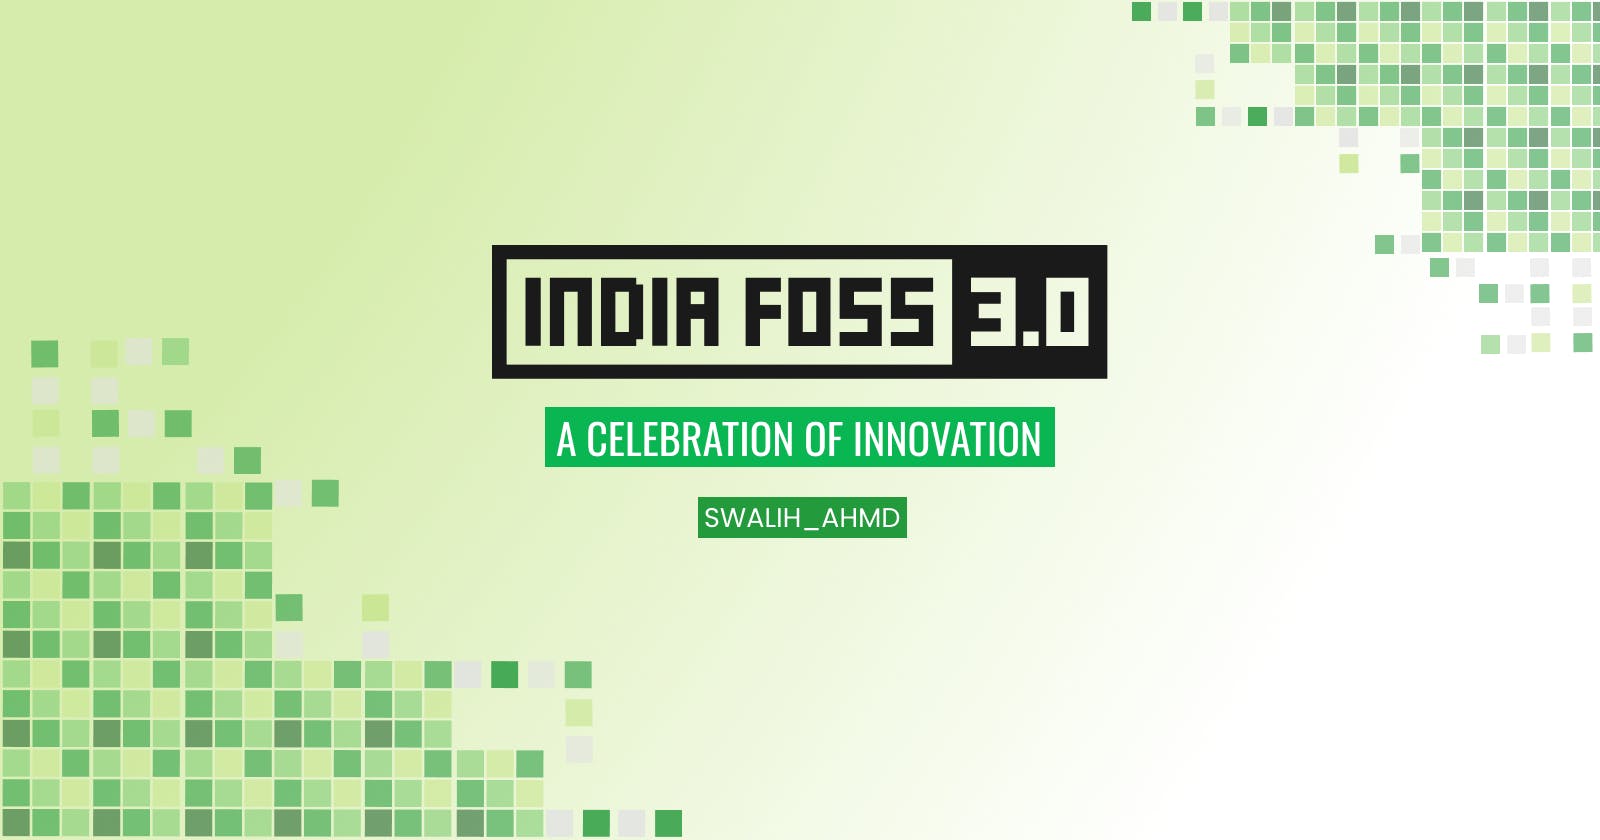 My Journey through India FOSS 3.0: A Quest for Open Source Enlightenment